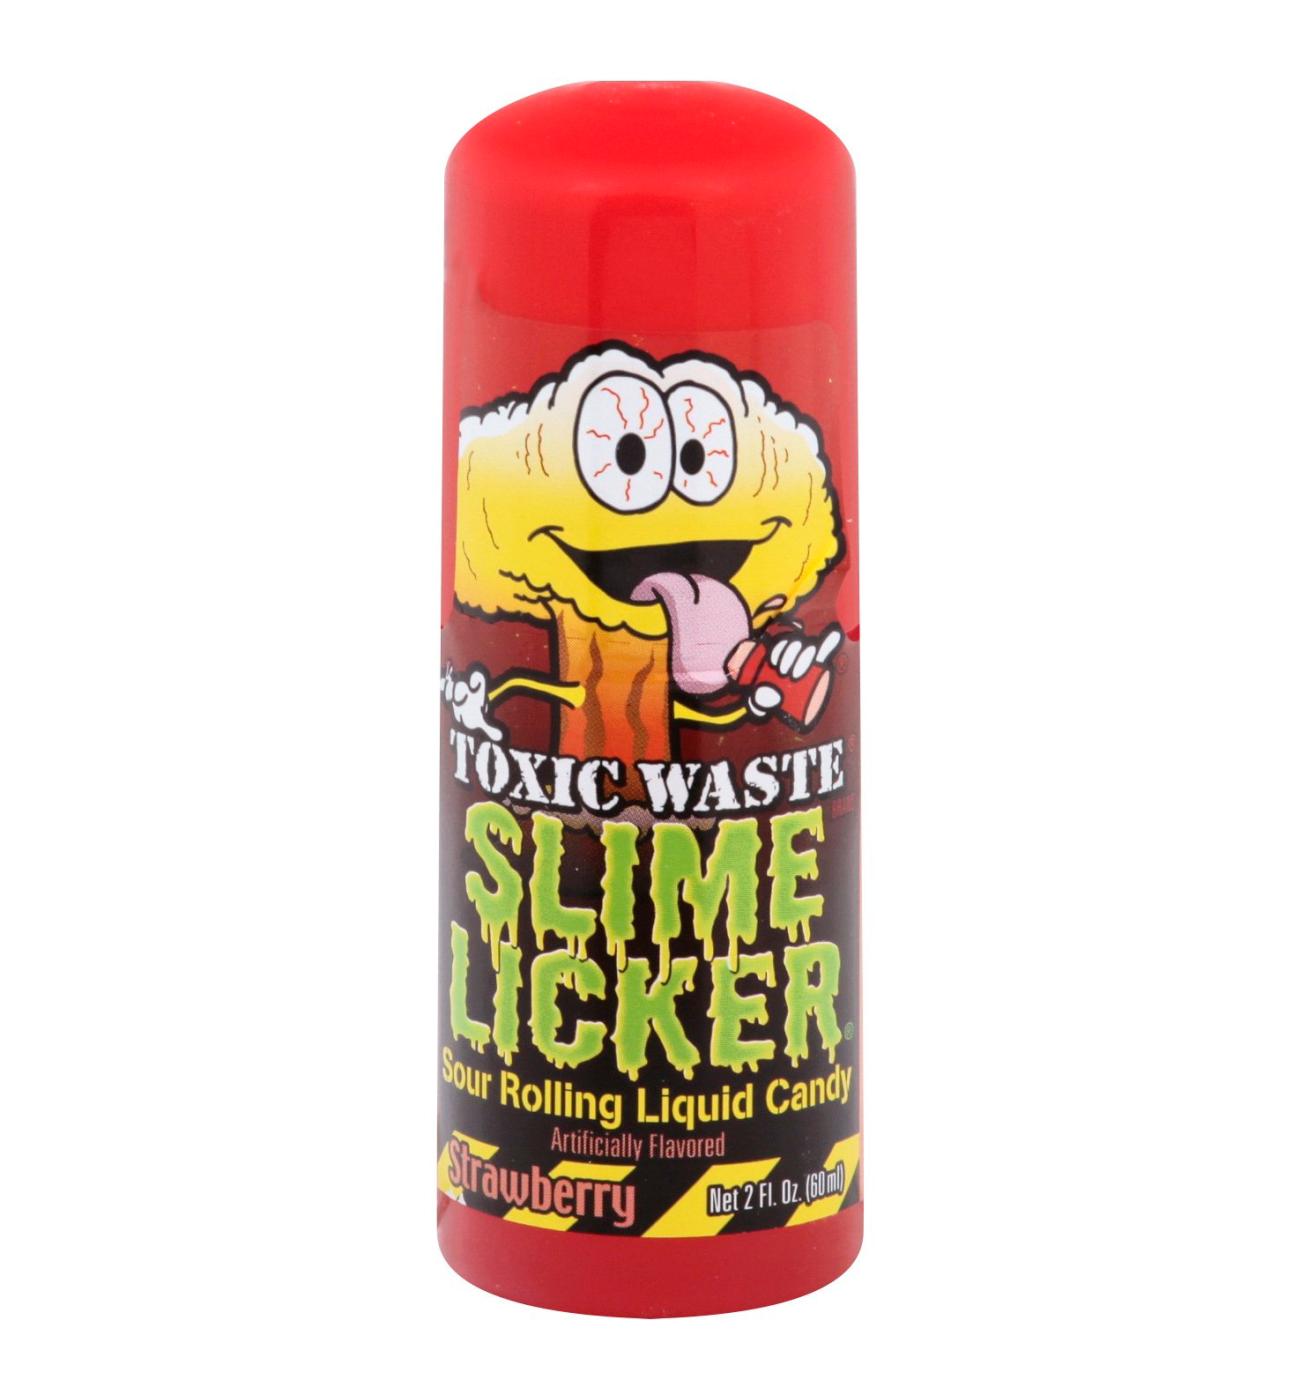 Toxic Waste Slime Licker Sour Rolling Liquid Candy, Assorted; image 3 of 3